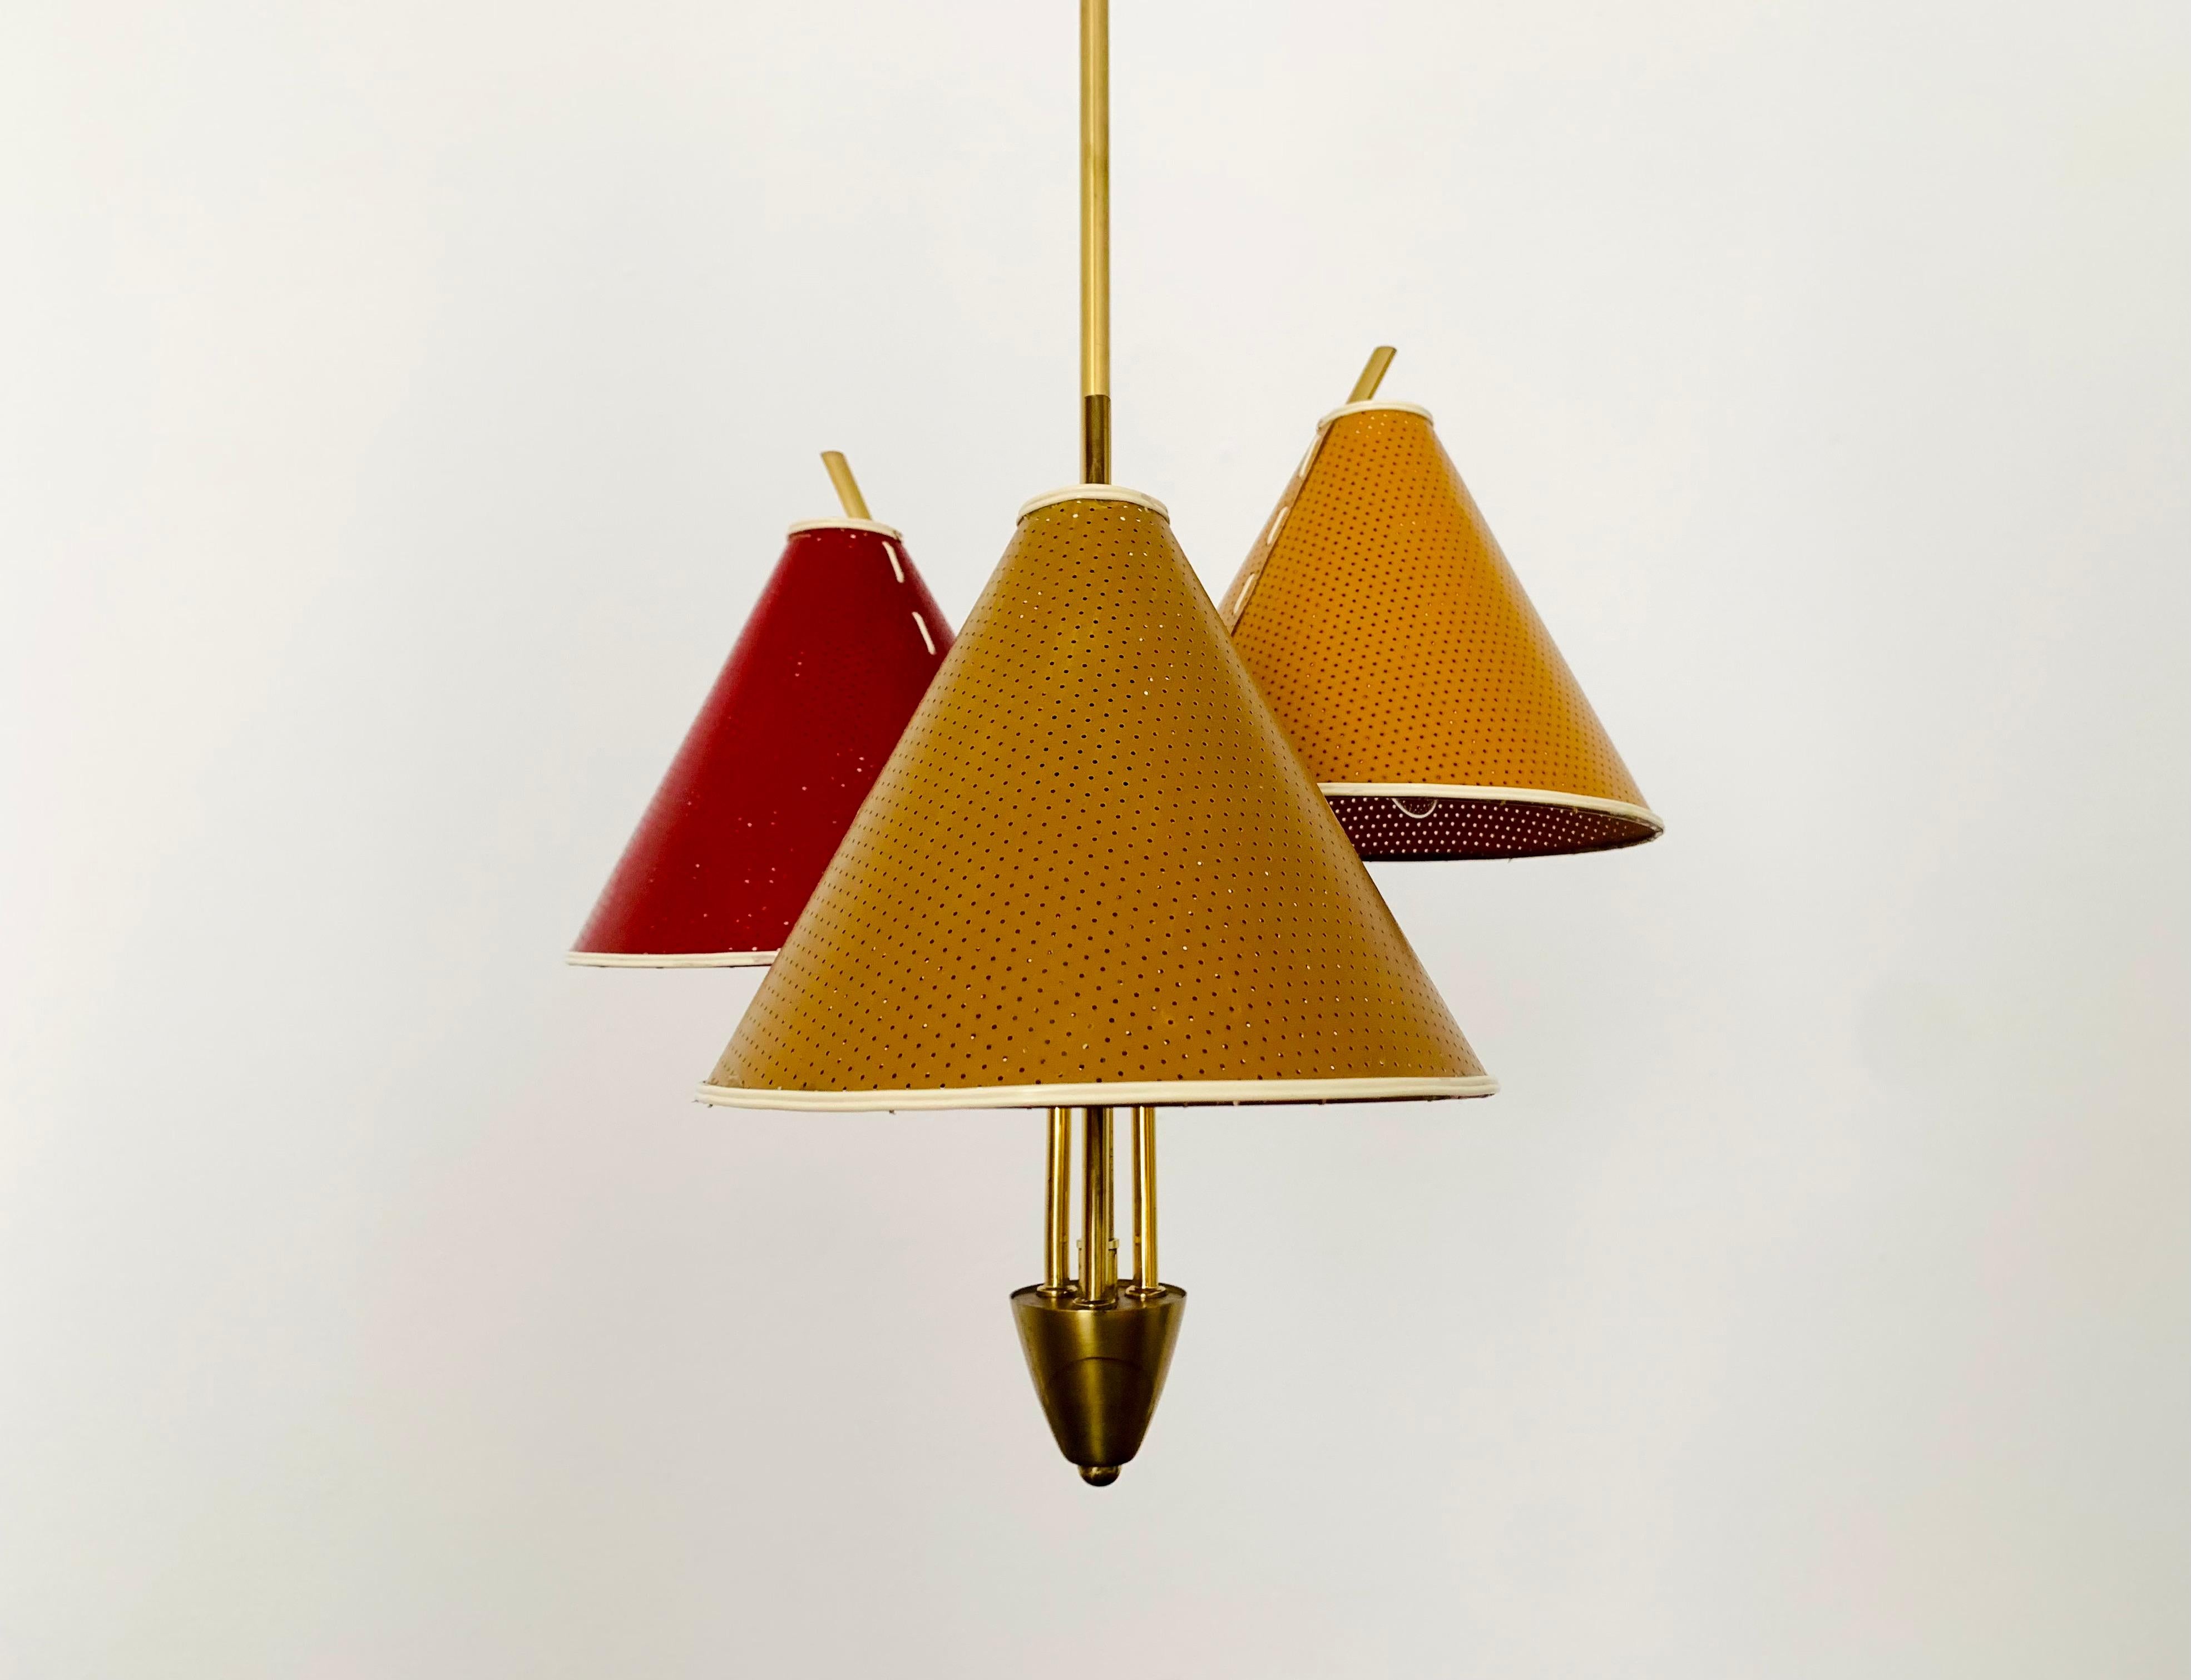 Exceptionally beautiful Italian pendant lamp from the 1950s.
Very decorative thanks to the special lampshades.
Wonderful design and an asset to any home.
A spectacular play of light is created in the room.

Condition:

Very good vintage condition